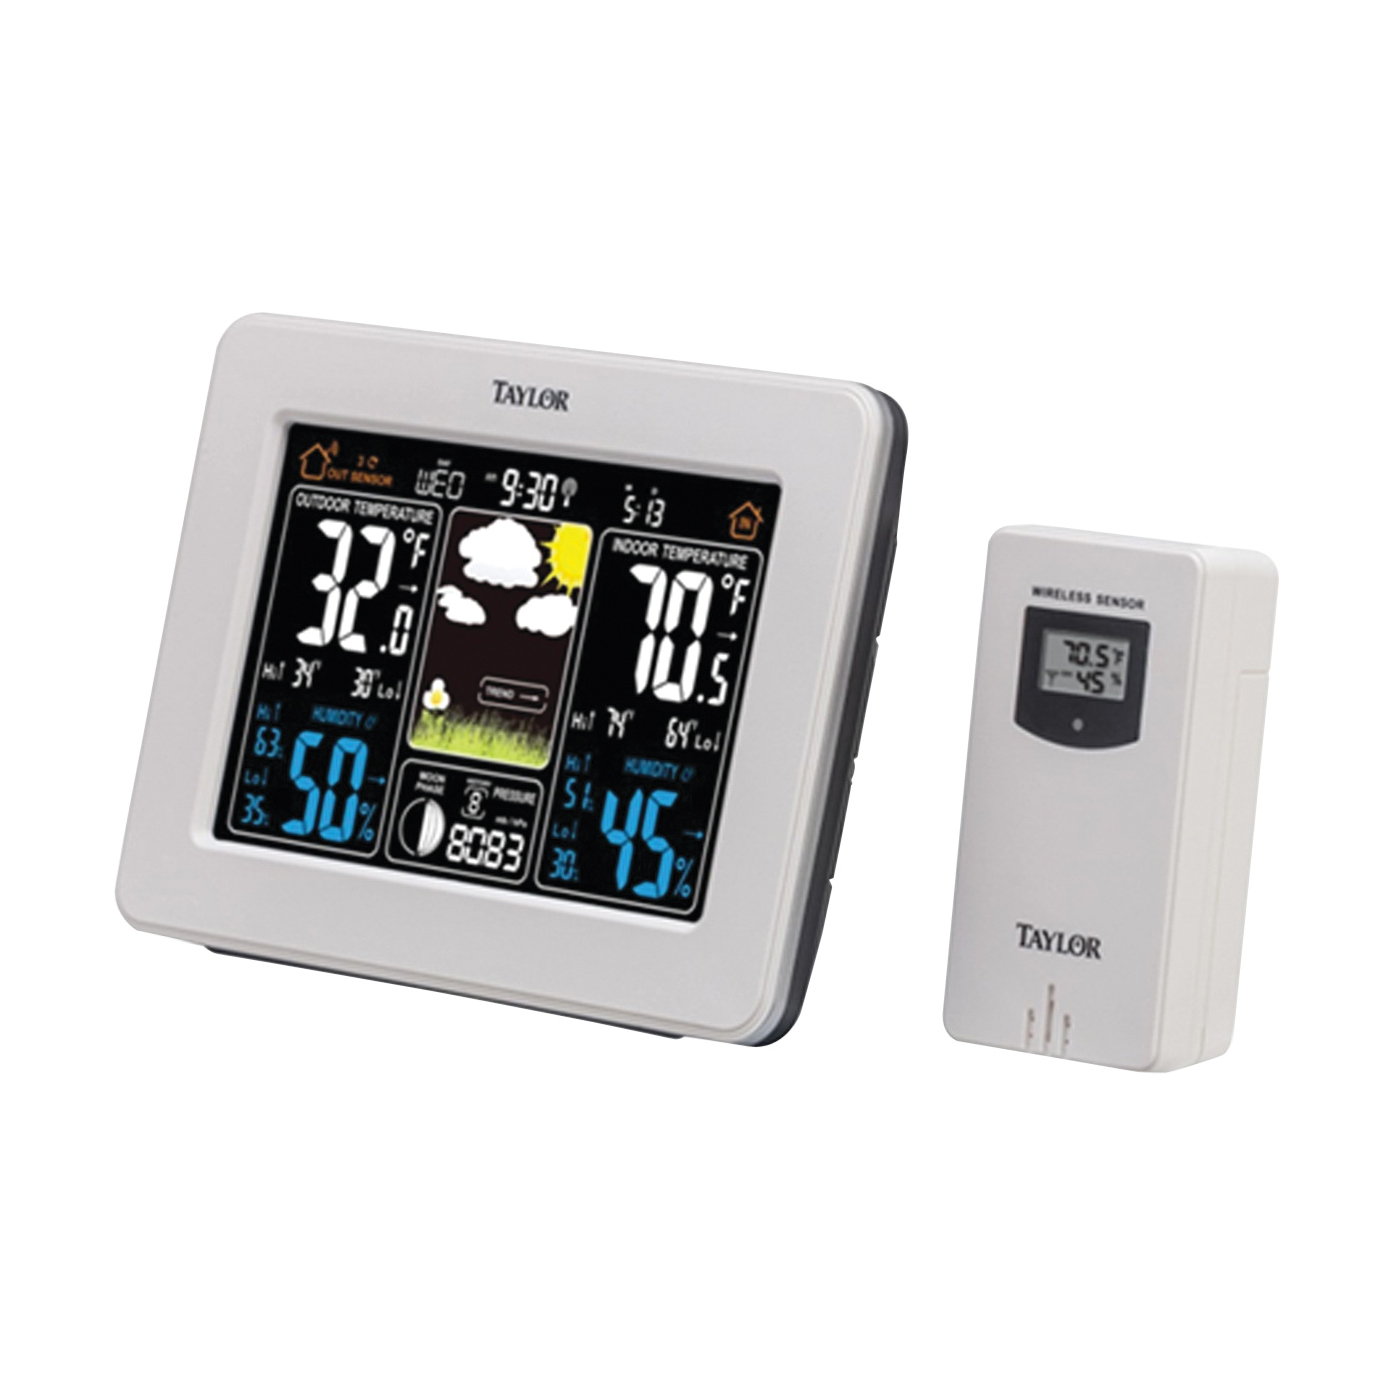 1736 Weather Forecaster, Battery, 122 deg F, 20 to 95 % Humidity Range, LCD Display, White